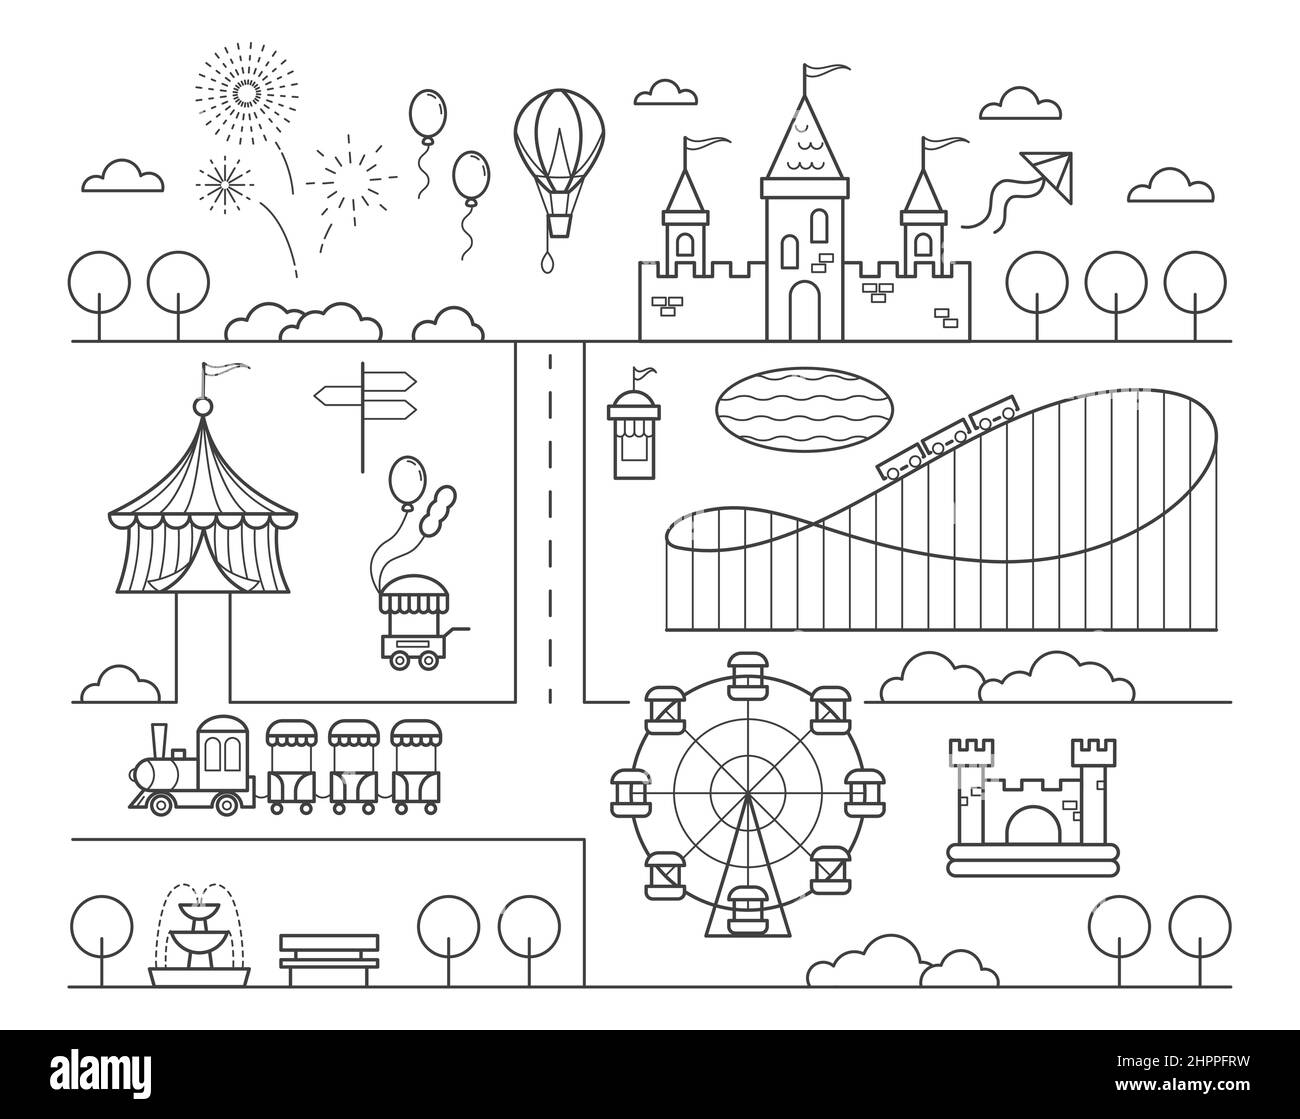 Amusement park map. Circus, ferris wheel rollercoaster and attractions for kids. Children playground. Outline vector illustration. Stock Vector